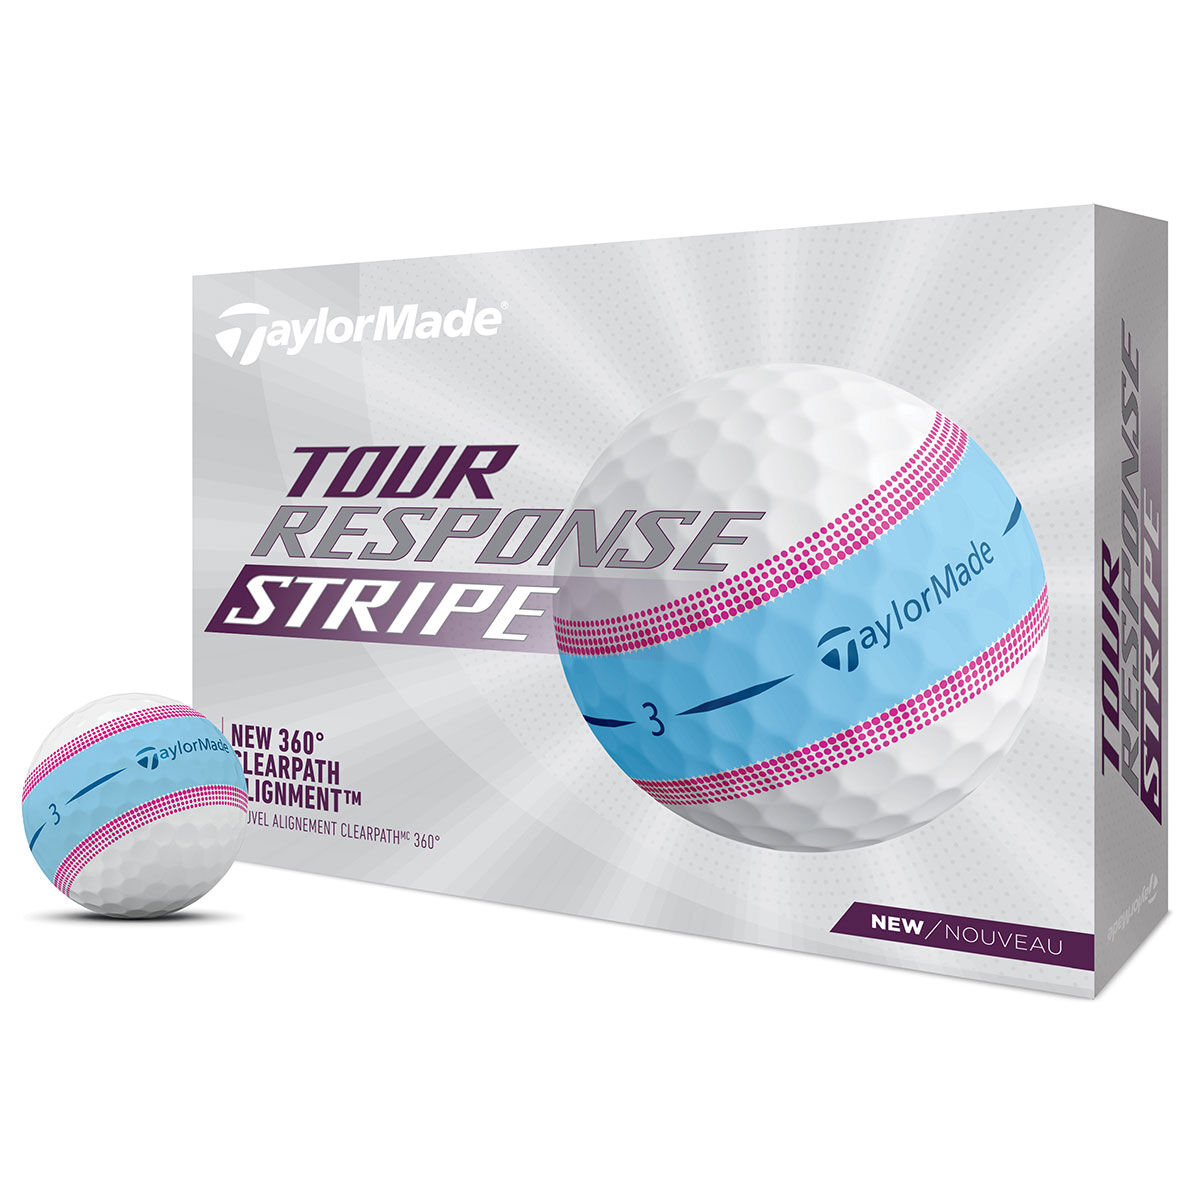 TaylorMade Tour Response Stripe 12 Golf Ball Pack, Mens, Blue/pink | American Golf - Father's Day Gift von TaylorMade